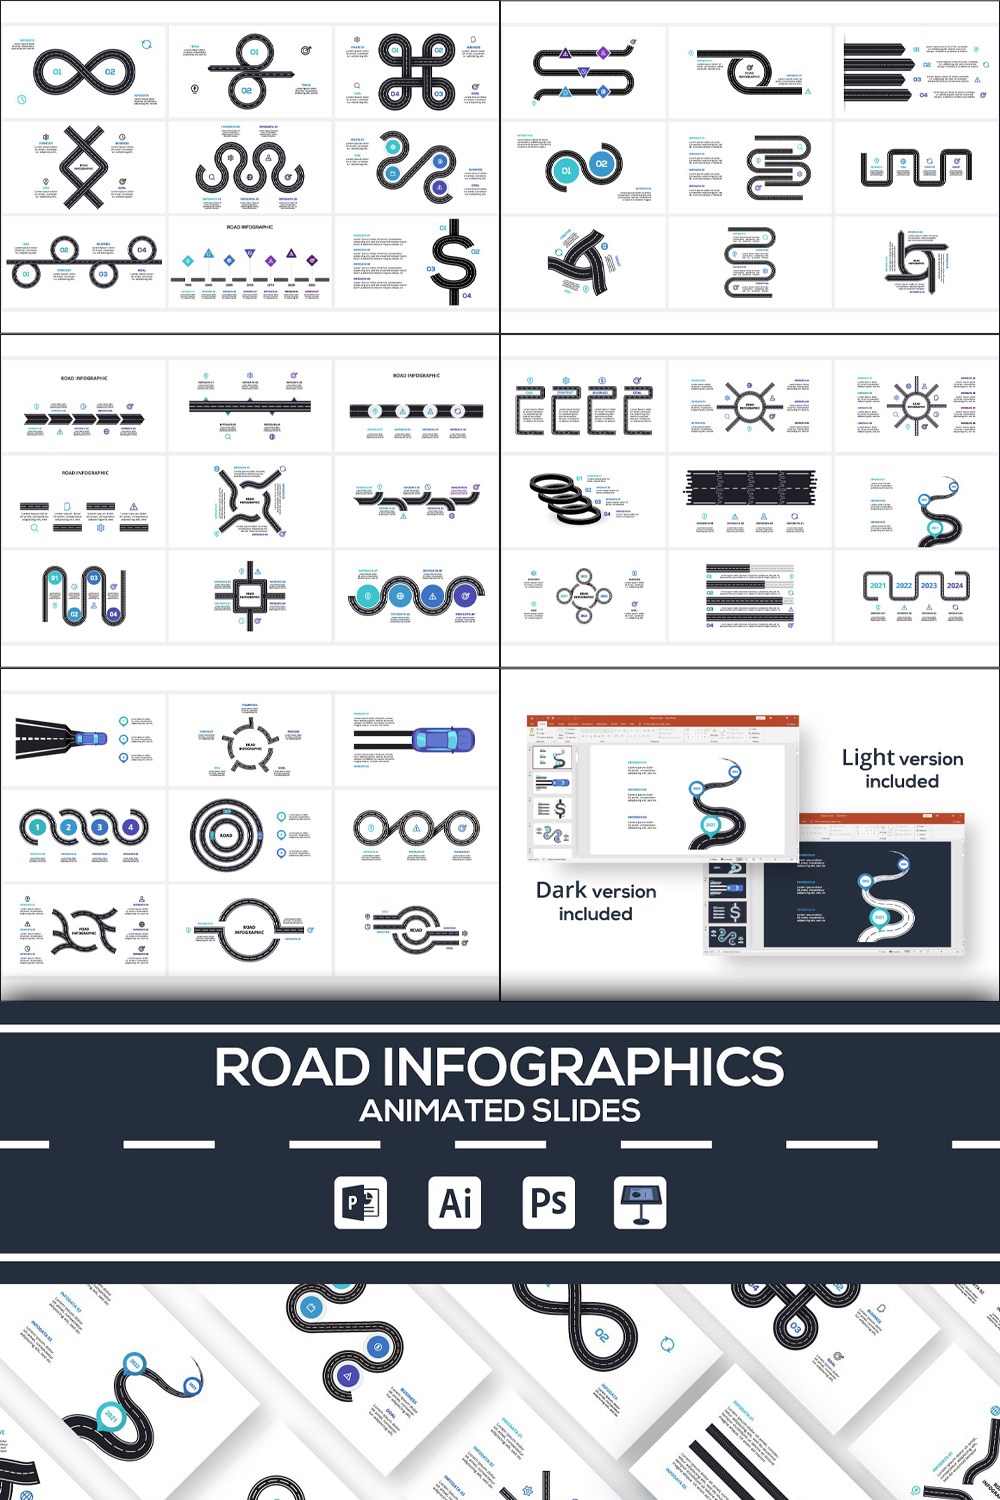 Road animated infographics of pinterest.